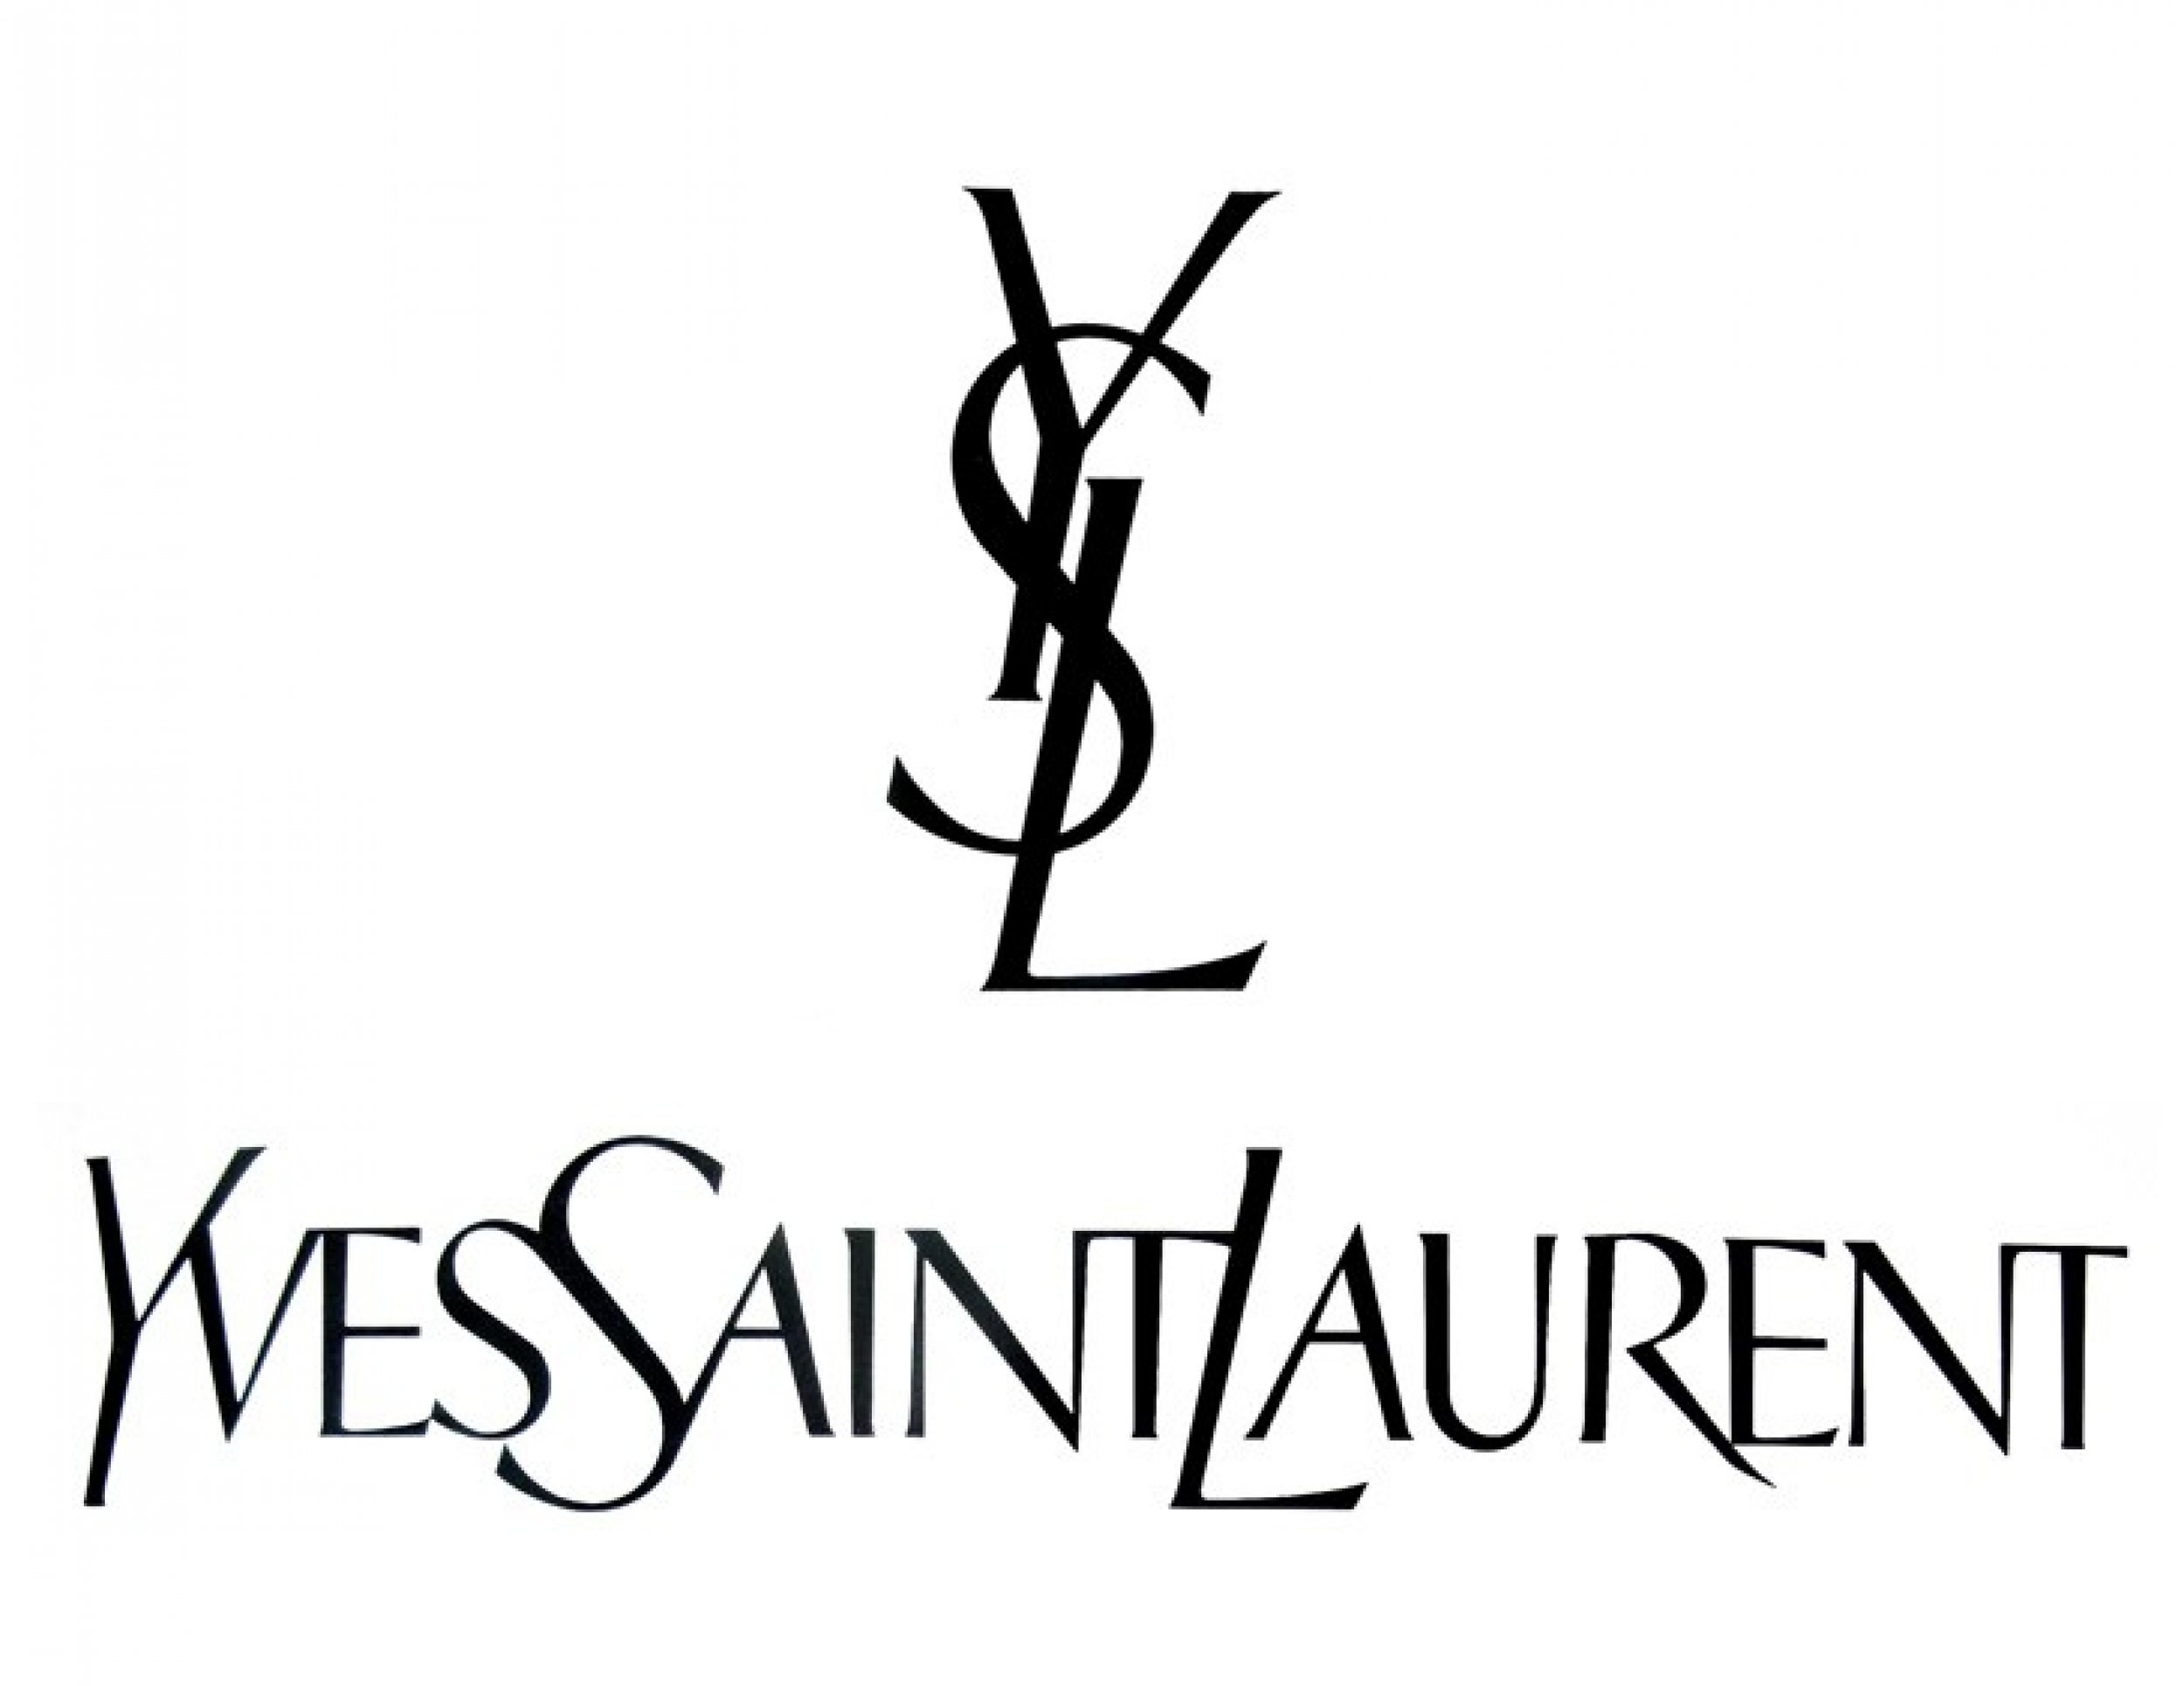 Let's get French brand names right from now on! 🤣🇫🇷 #french #paris , yves saint laurent